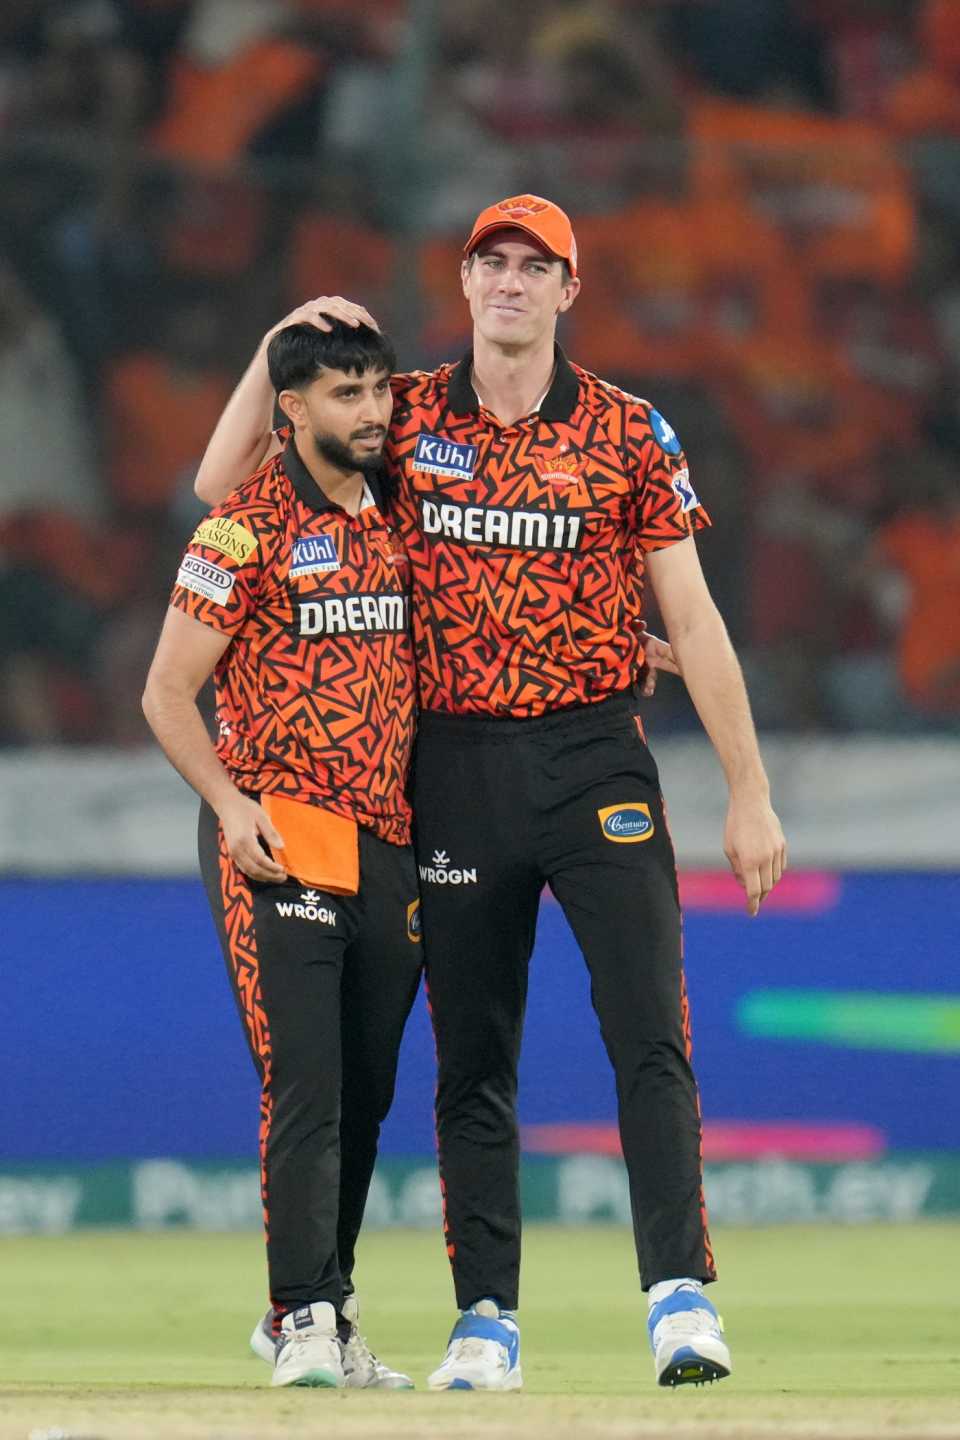 Mayank Markande dismissed Will Jacks with a wrong'un